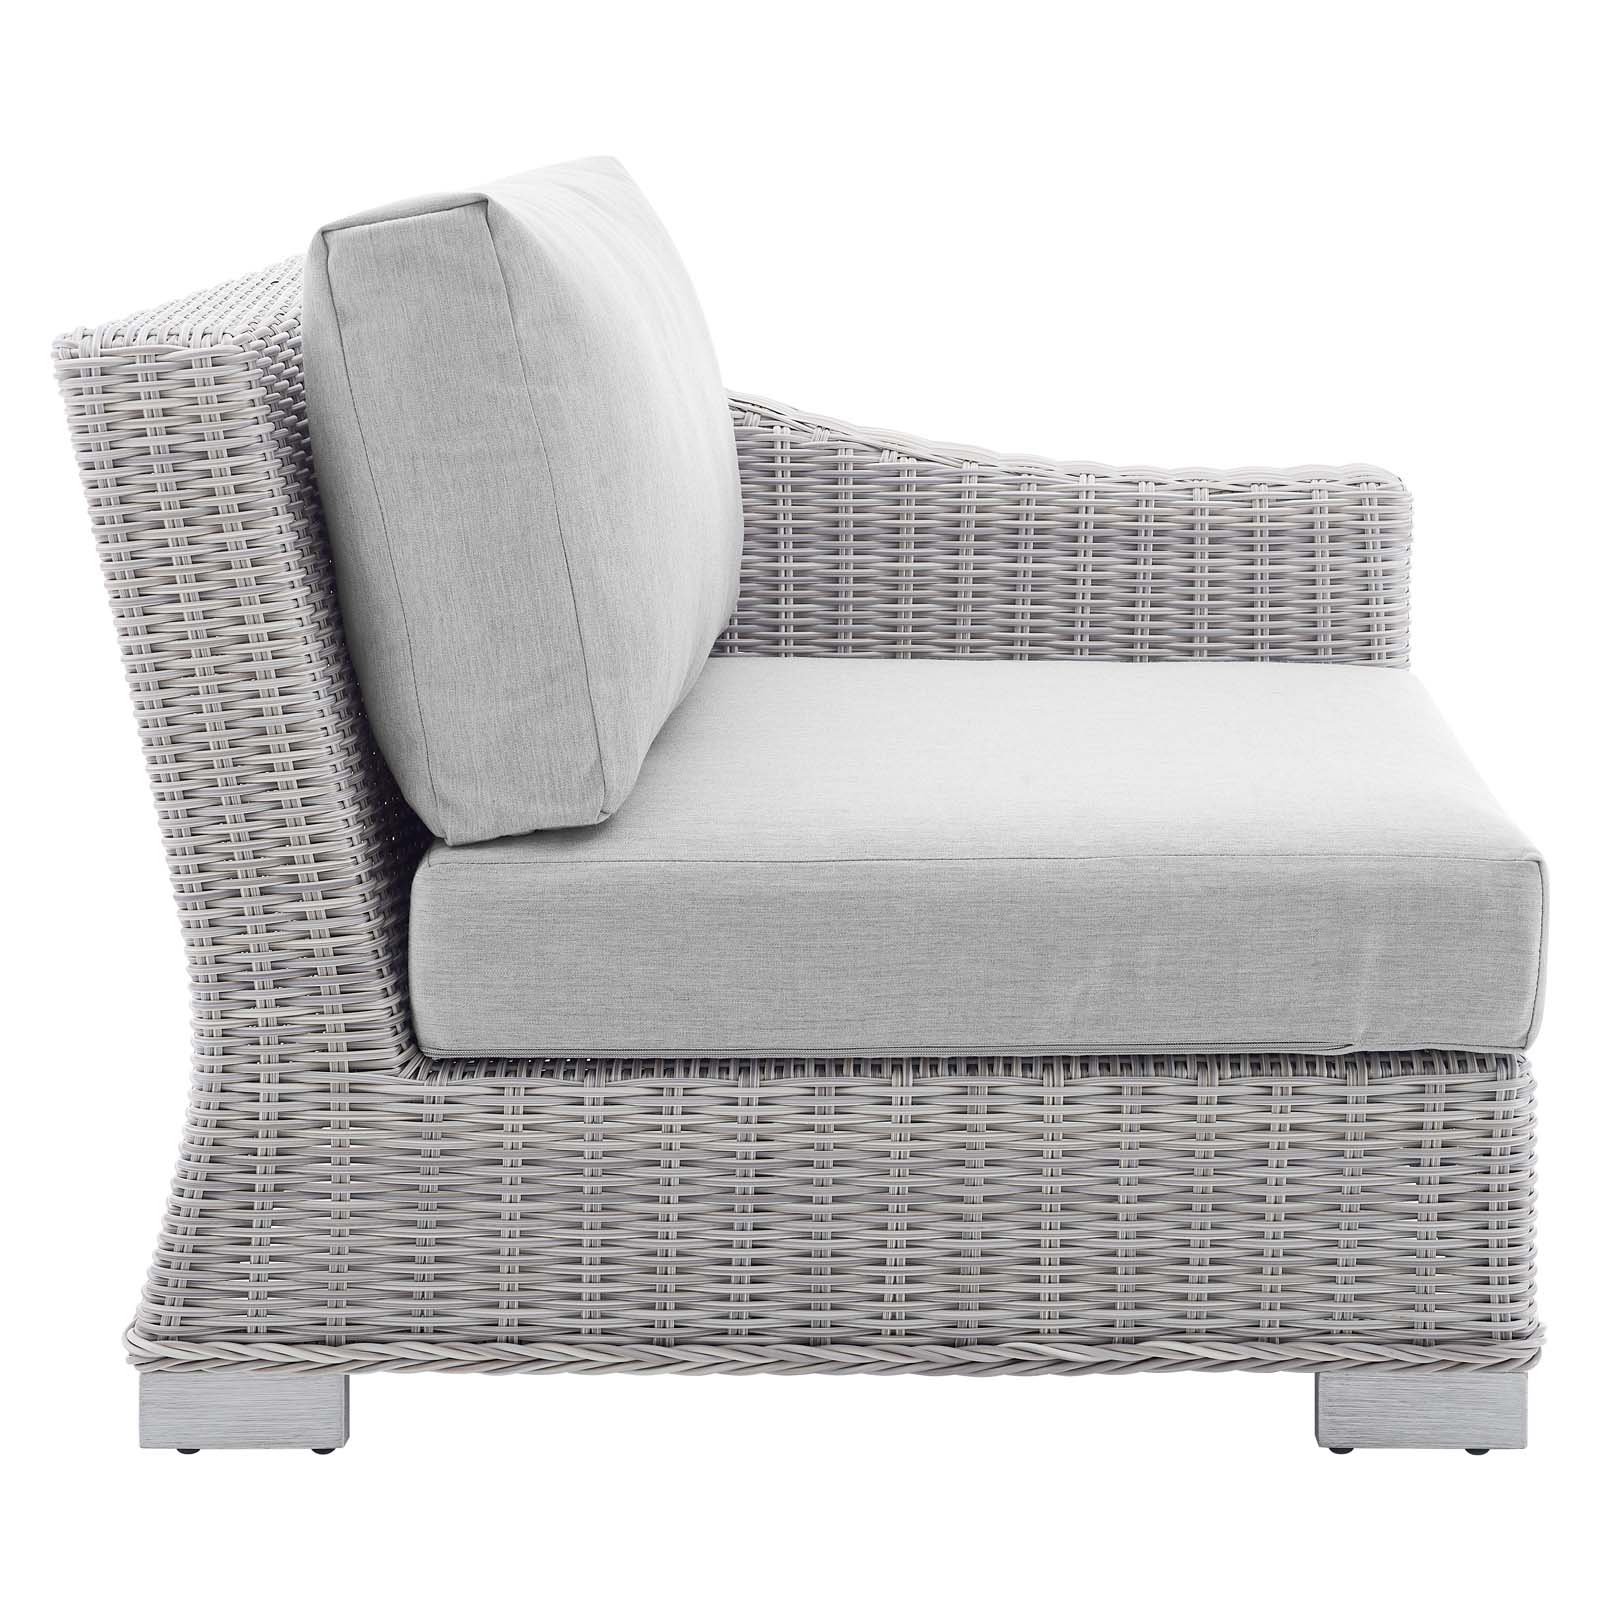 Modway Conway Sunbrella® Outdoor Patio Wicker Rattan Right-Arm Chair in Light Gray Gray - image 3 of 9